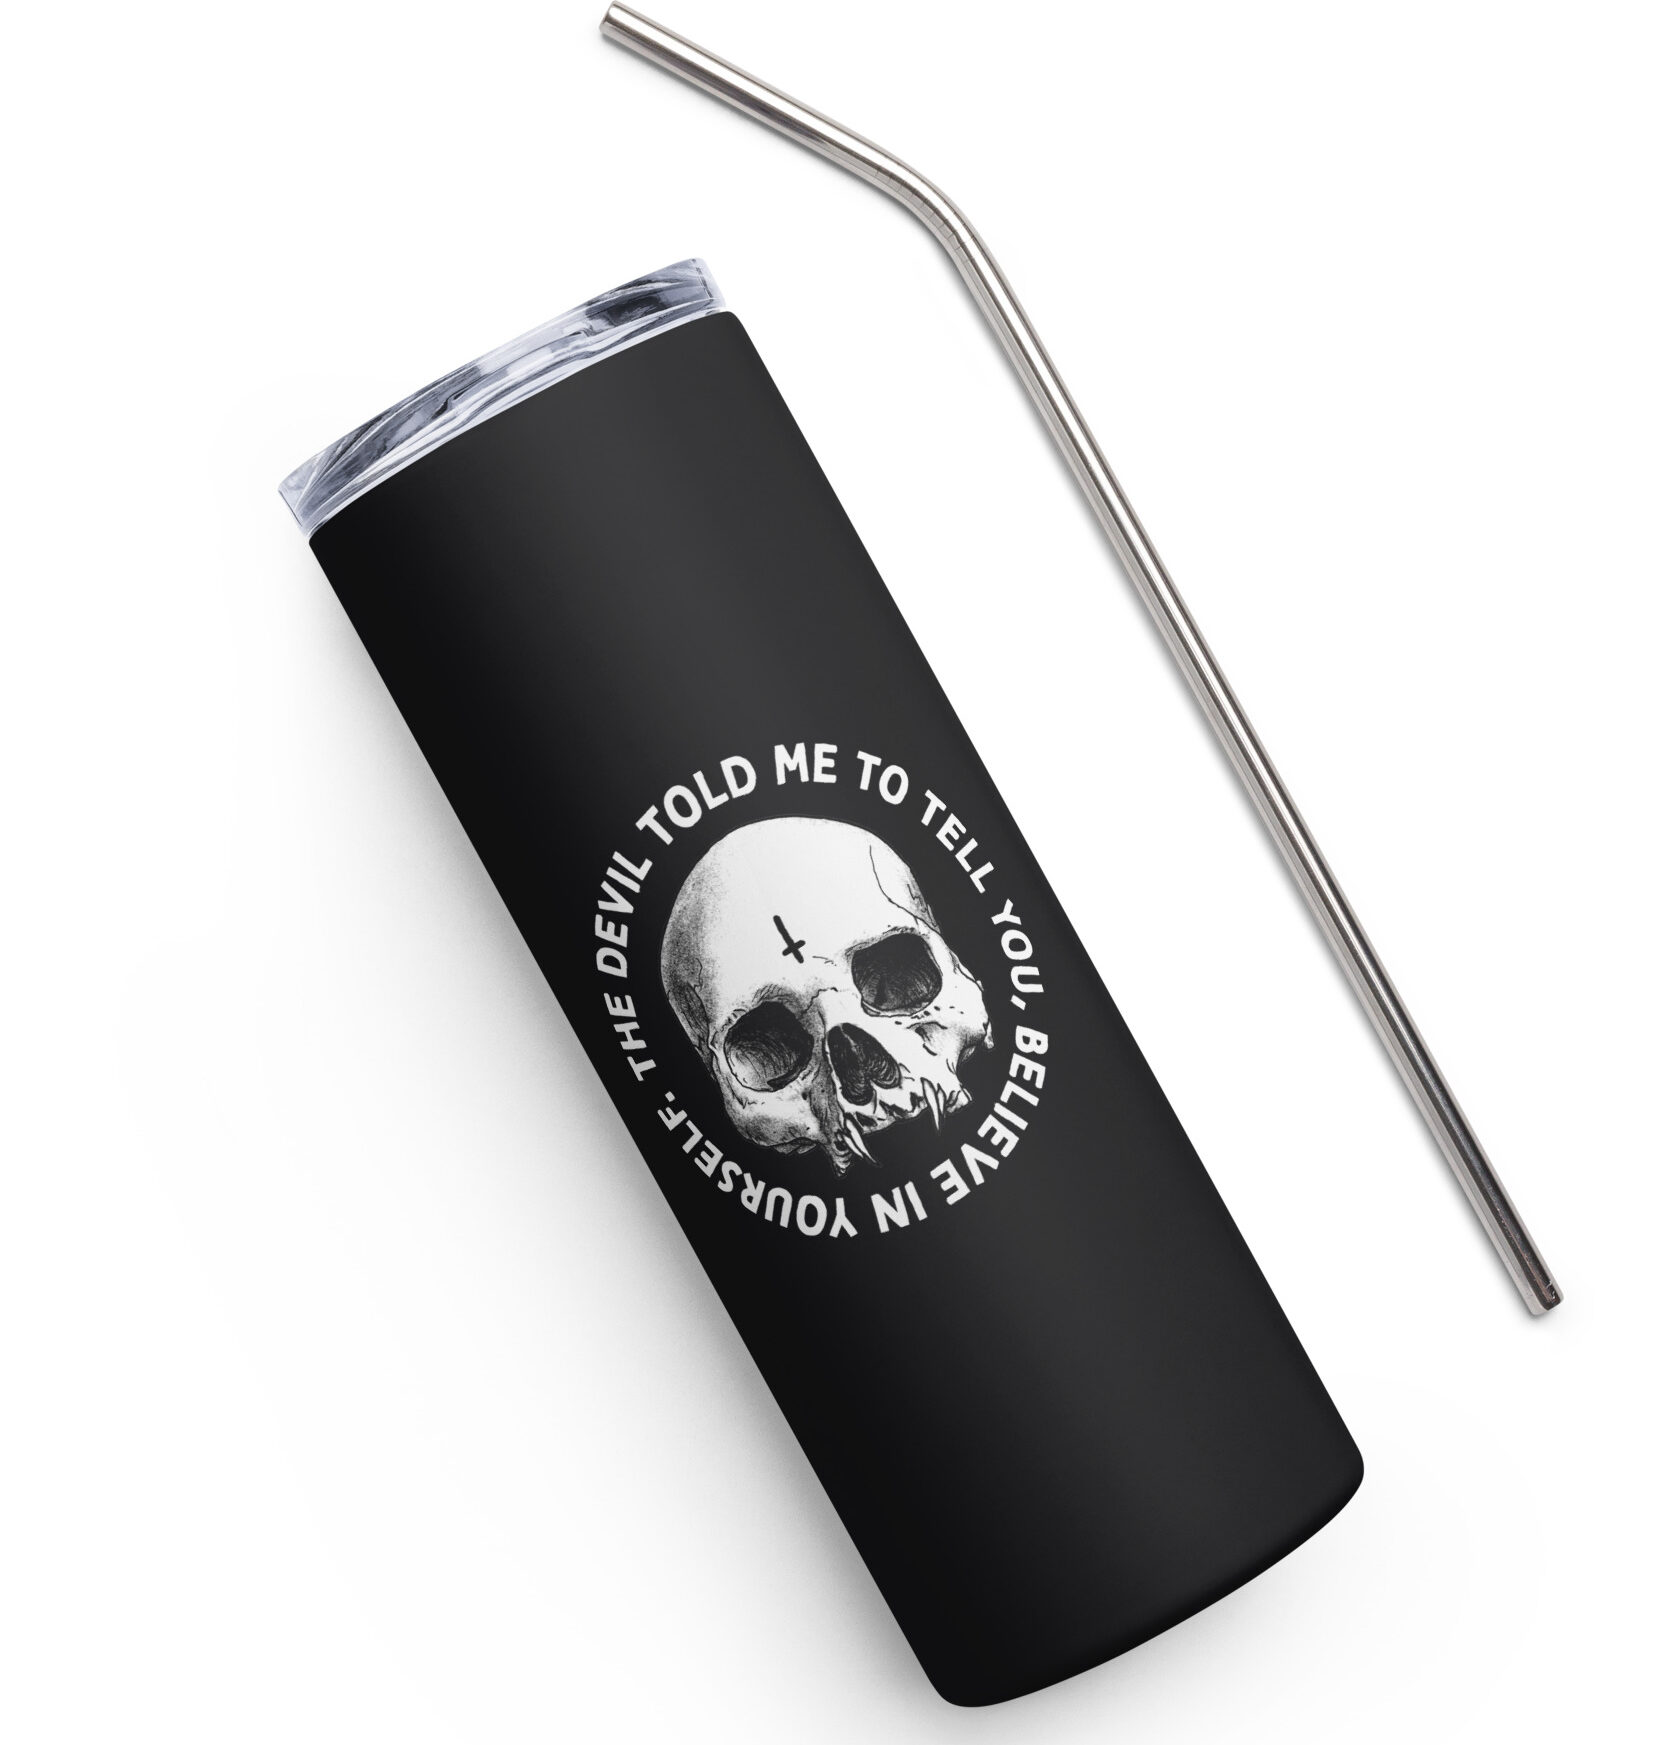 Featured image for “The devil told me to tell you - Stainless steel tumbler”